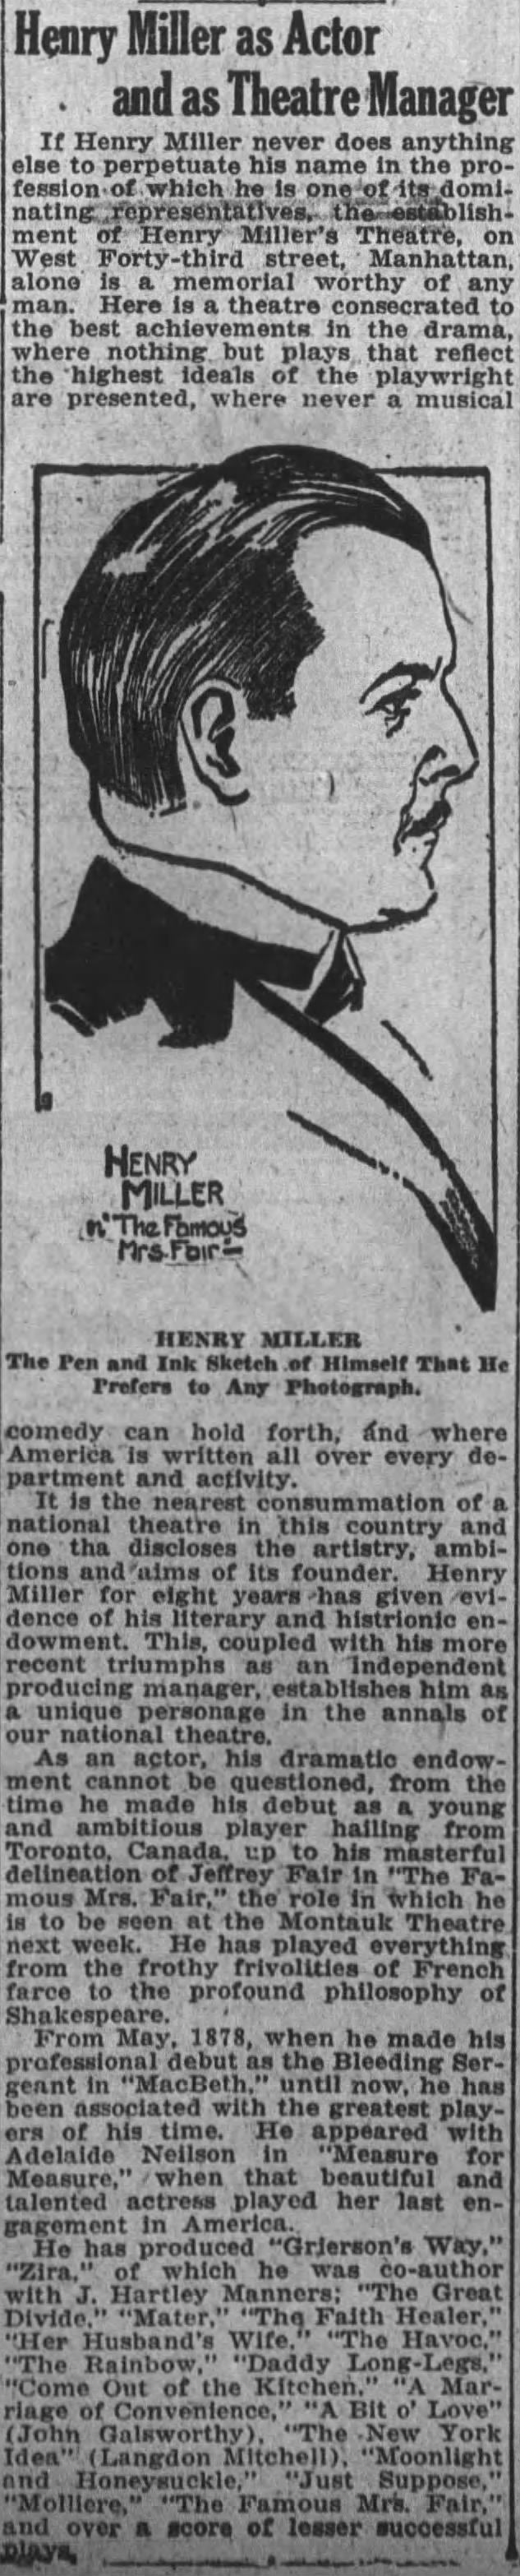 Henry Miller as Actor and as Theatre Manager